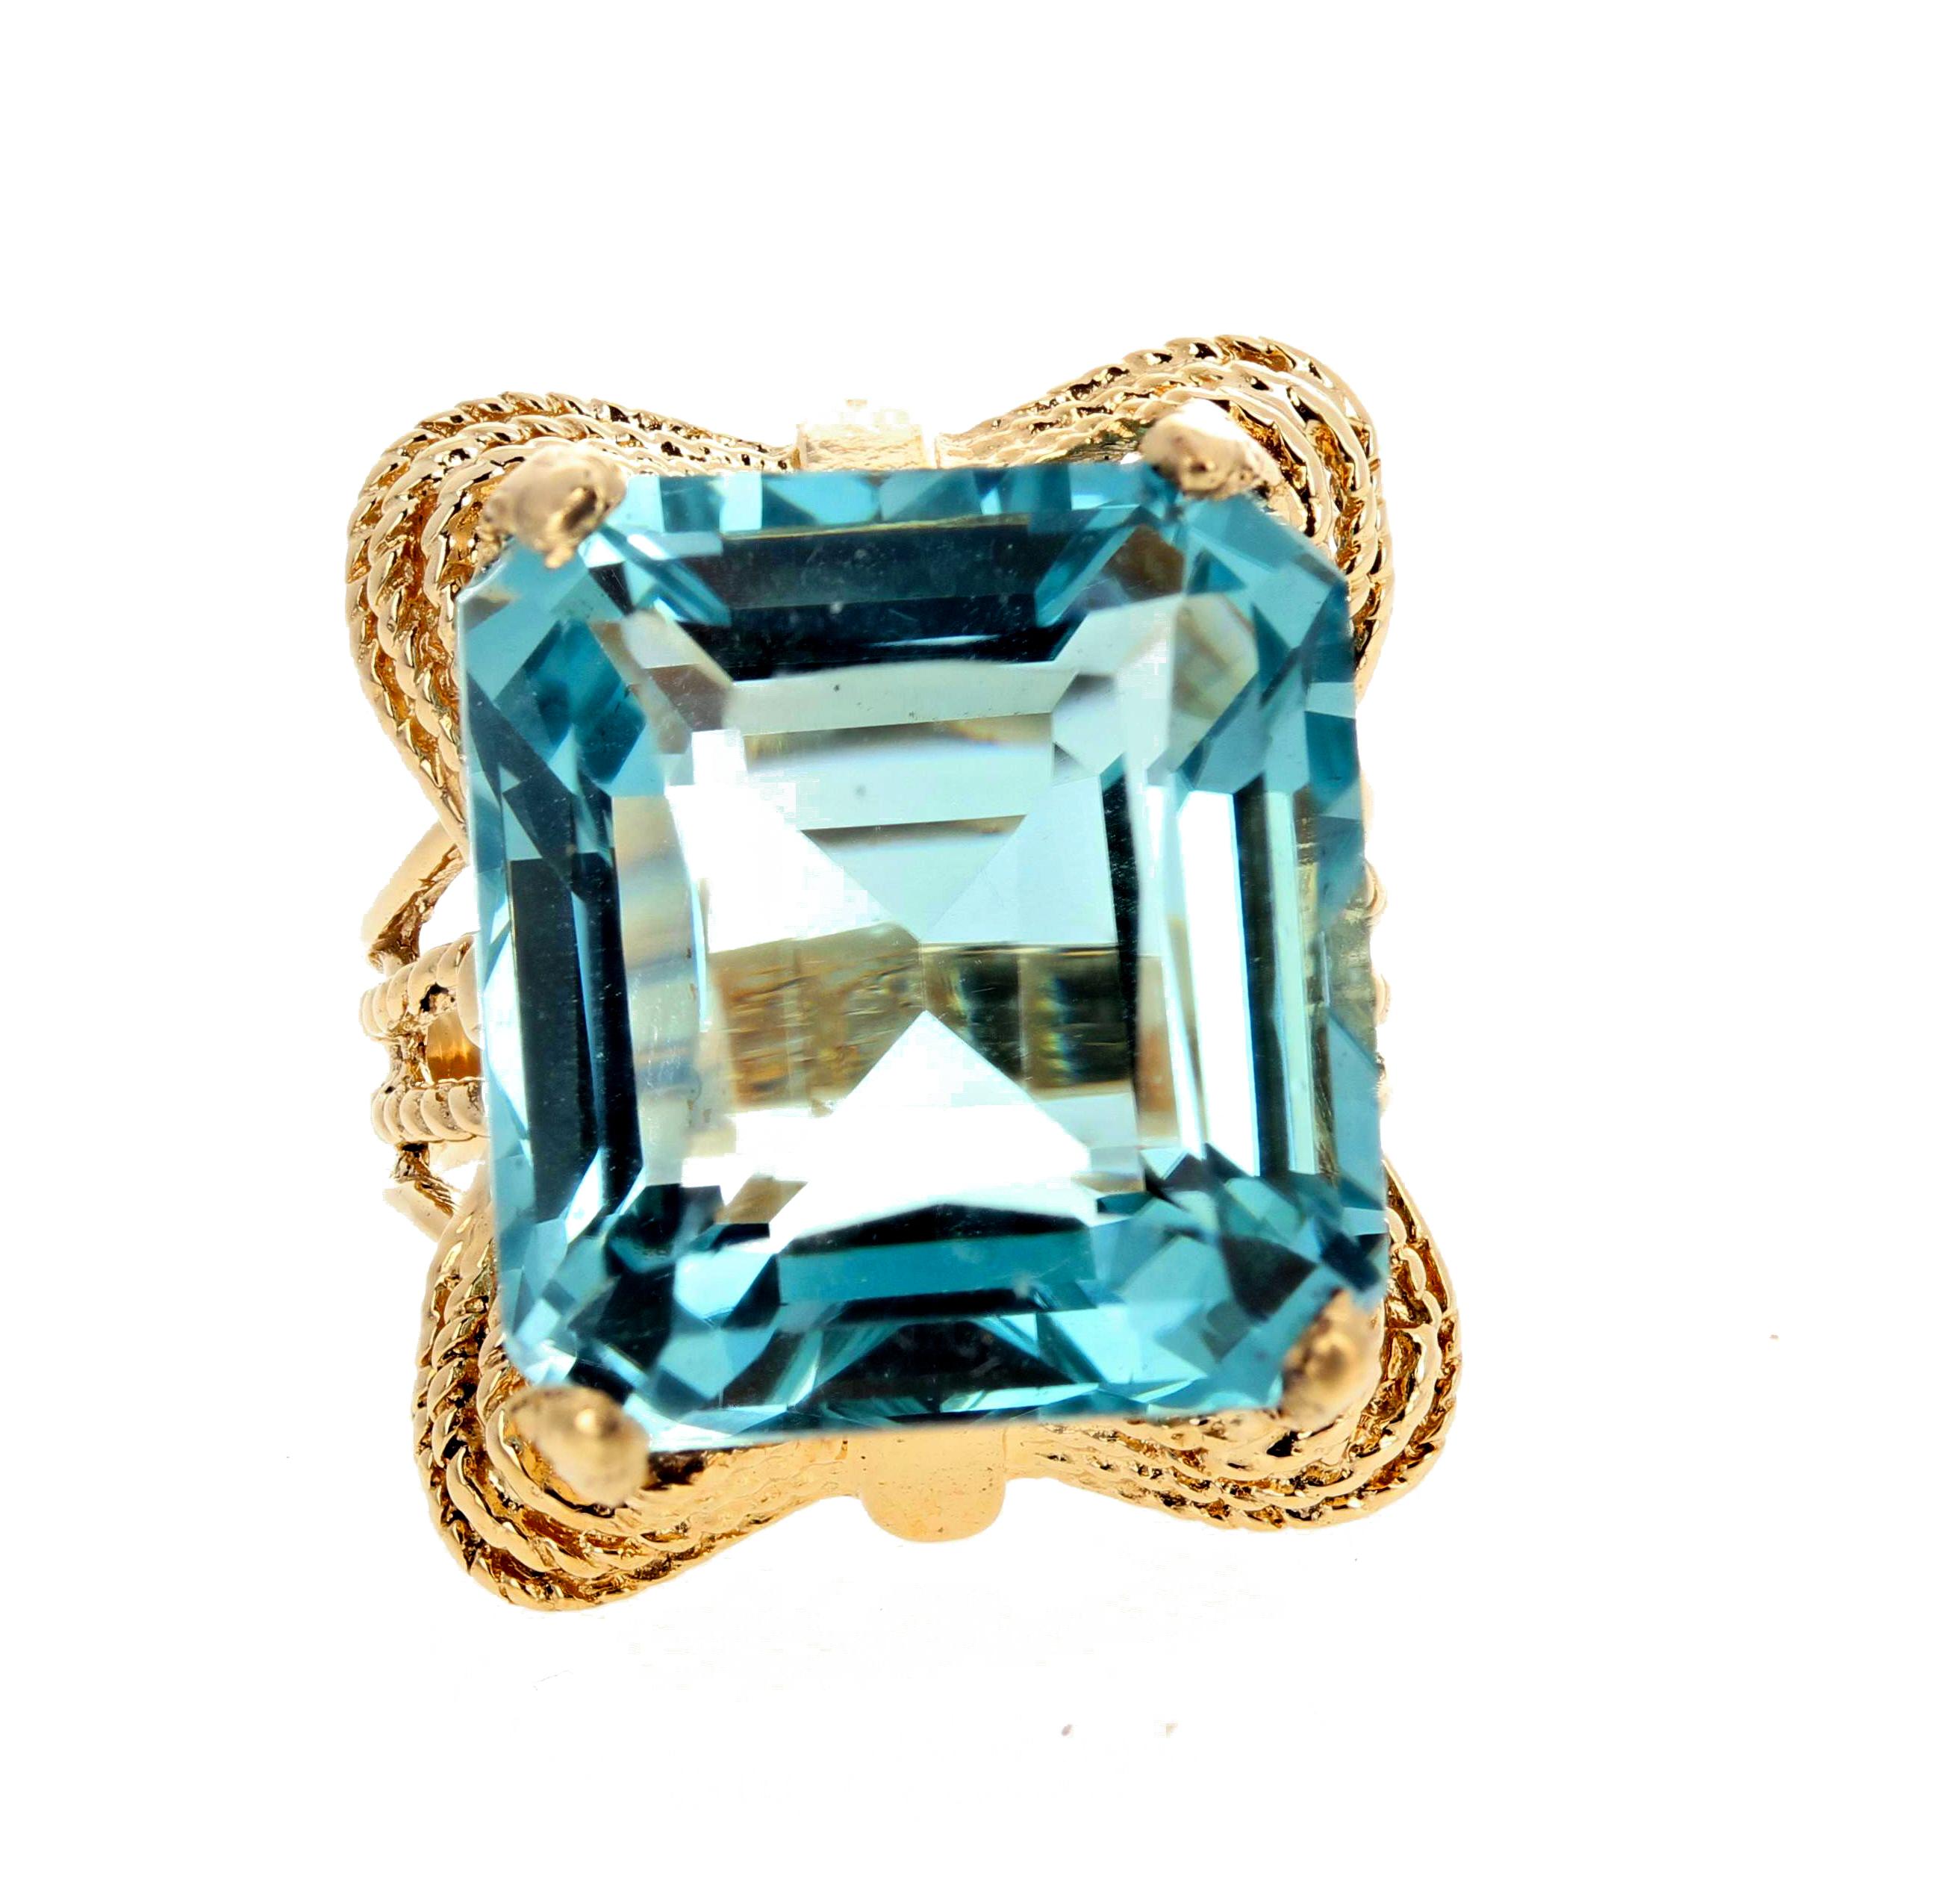 The magnificence and perfection of this Aquamarine is unmatched.  This Cushion cut 19.02 Carat glittering Aquamarine is set in a 14KT yellow gold ring size 7 (sizable).  The Aquamarine is 17 mm x 15 mm.  There are no eye visible inclusions in this